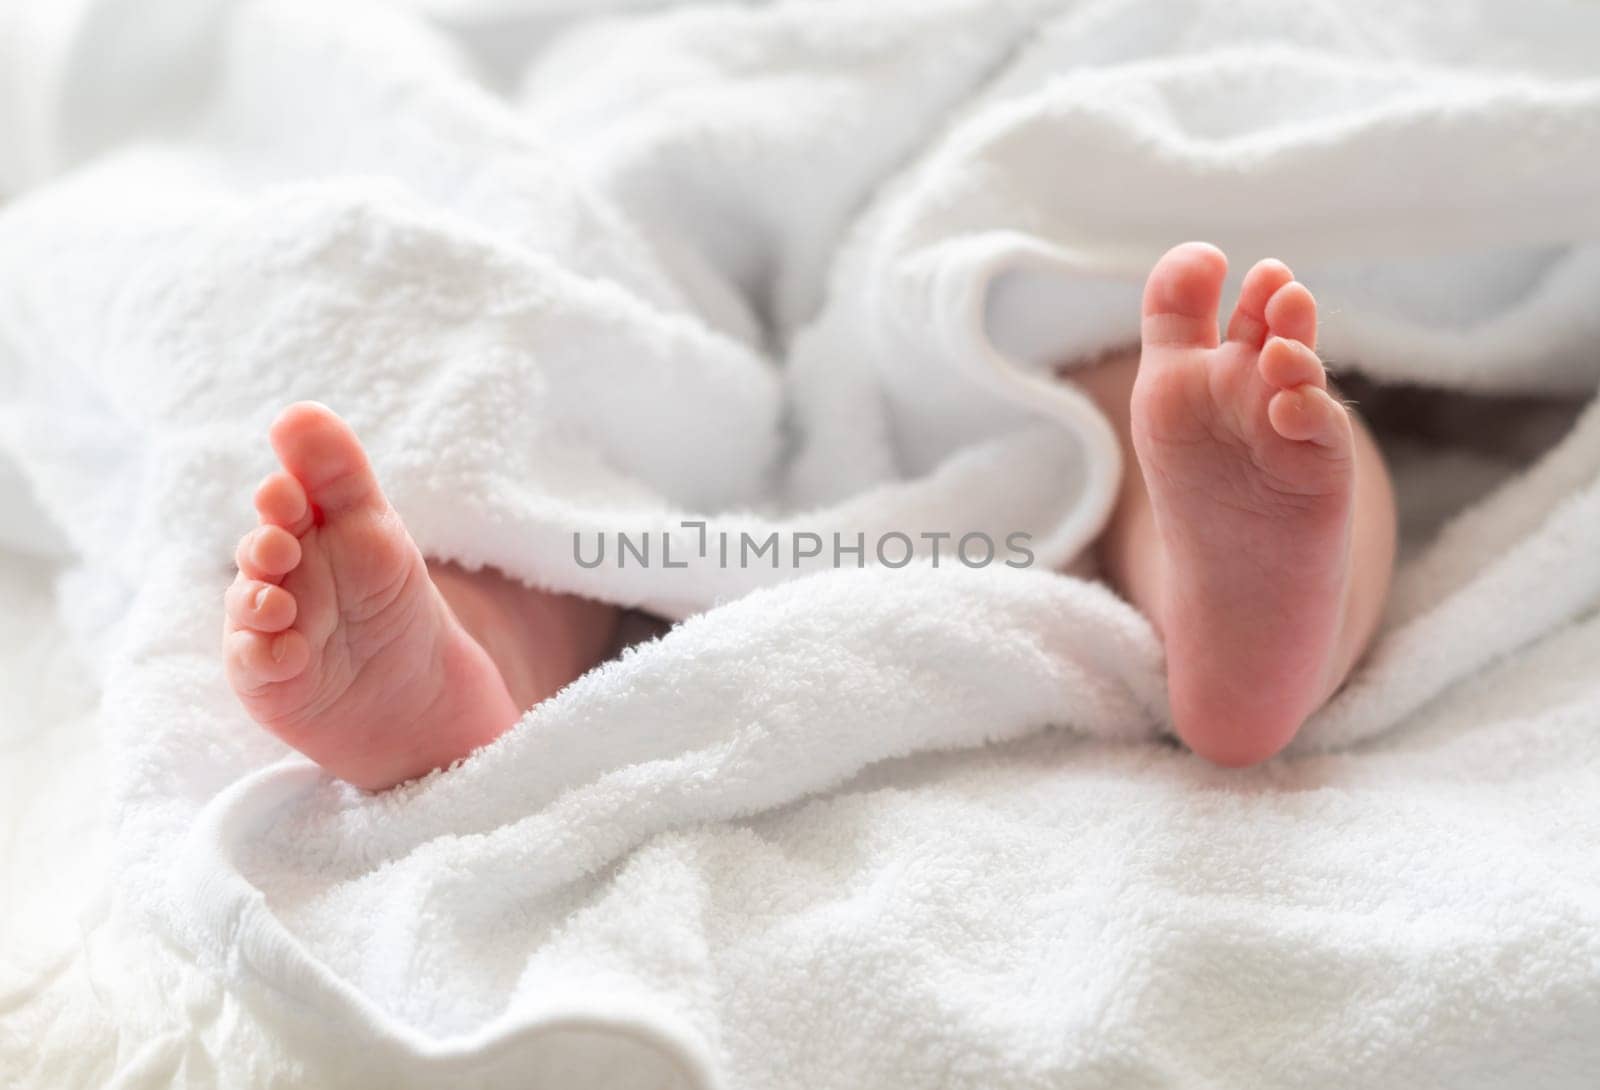 The infant's small feet emerging from under the comforting protection of a white towel showcasing the care post bathing